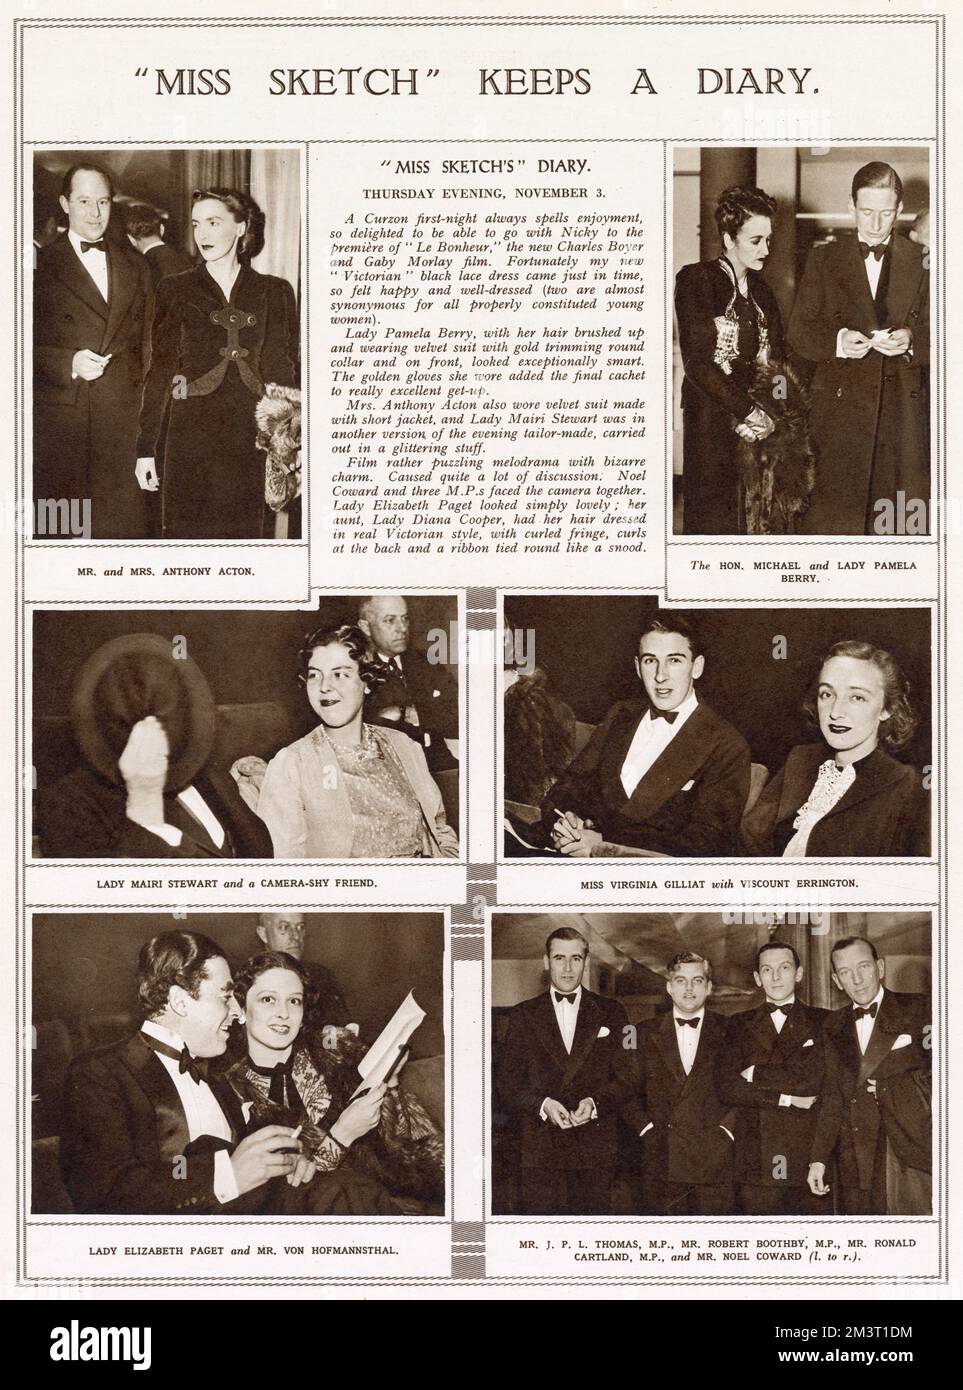 Page from The Sketch reporting on the first night of the Charles Boyer film, 'Le Bonheur' at the Curzon cinema. Guests include Mr and Mrs Anthony Acton, Sir Michael and Lady Pamela Berry (nee Smith), Lady Mairi Stewart, Viscount Errington, Virginia Gilliat, Lady Elizabeth Paget and Herr von Hoffmanstahl. The final picture, bottom right, shows Noel Coward (far right) with MPs. Mr J. P. L. Thomas, Robert Boothby and Ronald Cartland. Bob Boothby would later become a prominent figure in trying to decriminalise homosexuality.      Date: 1938 Stock Photo